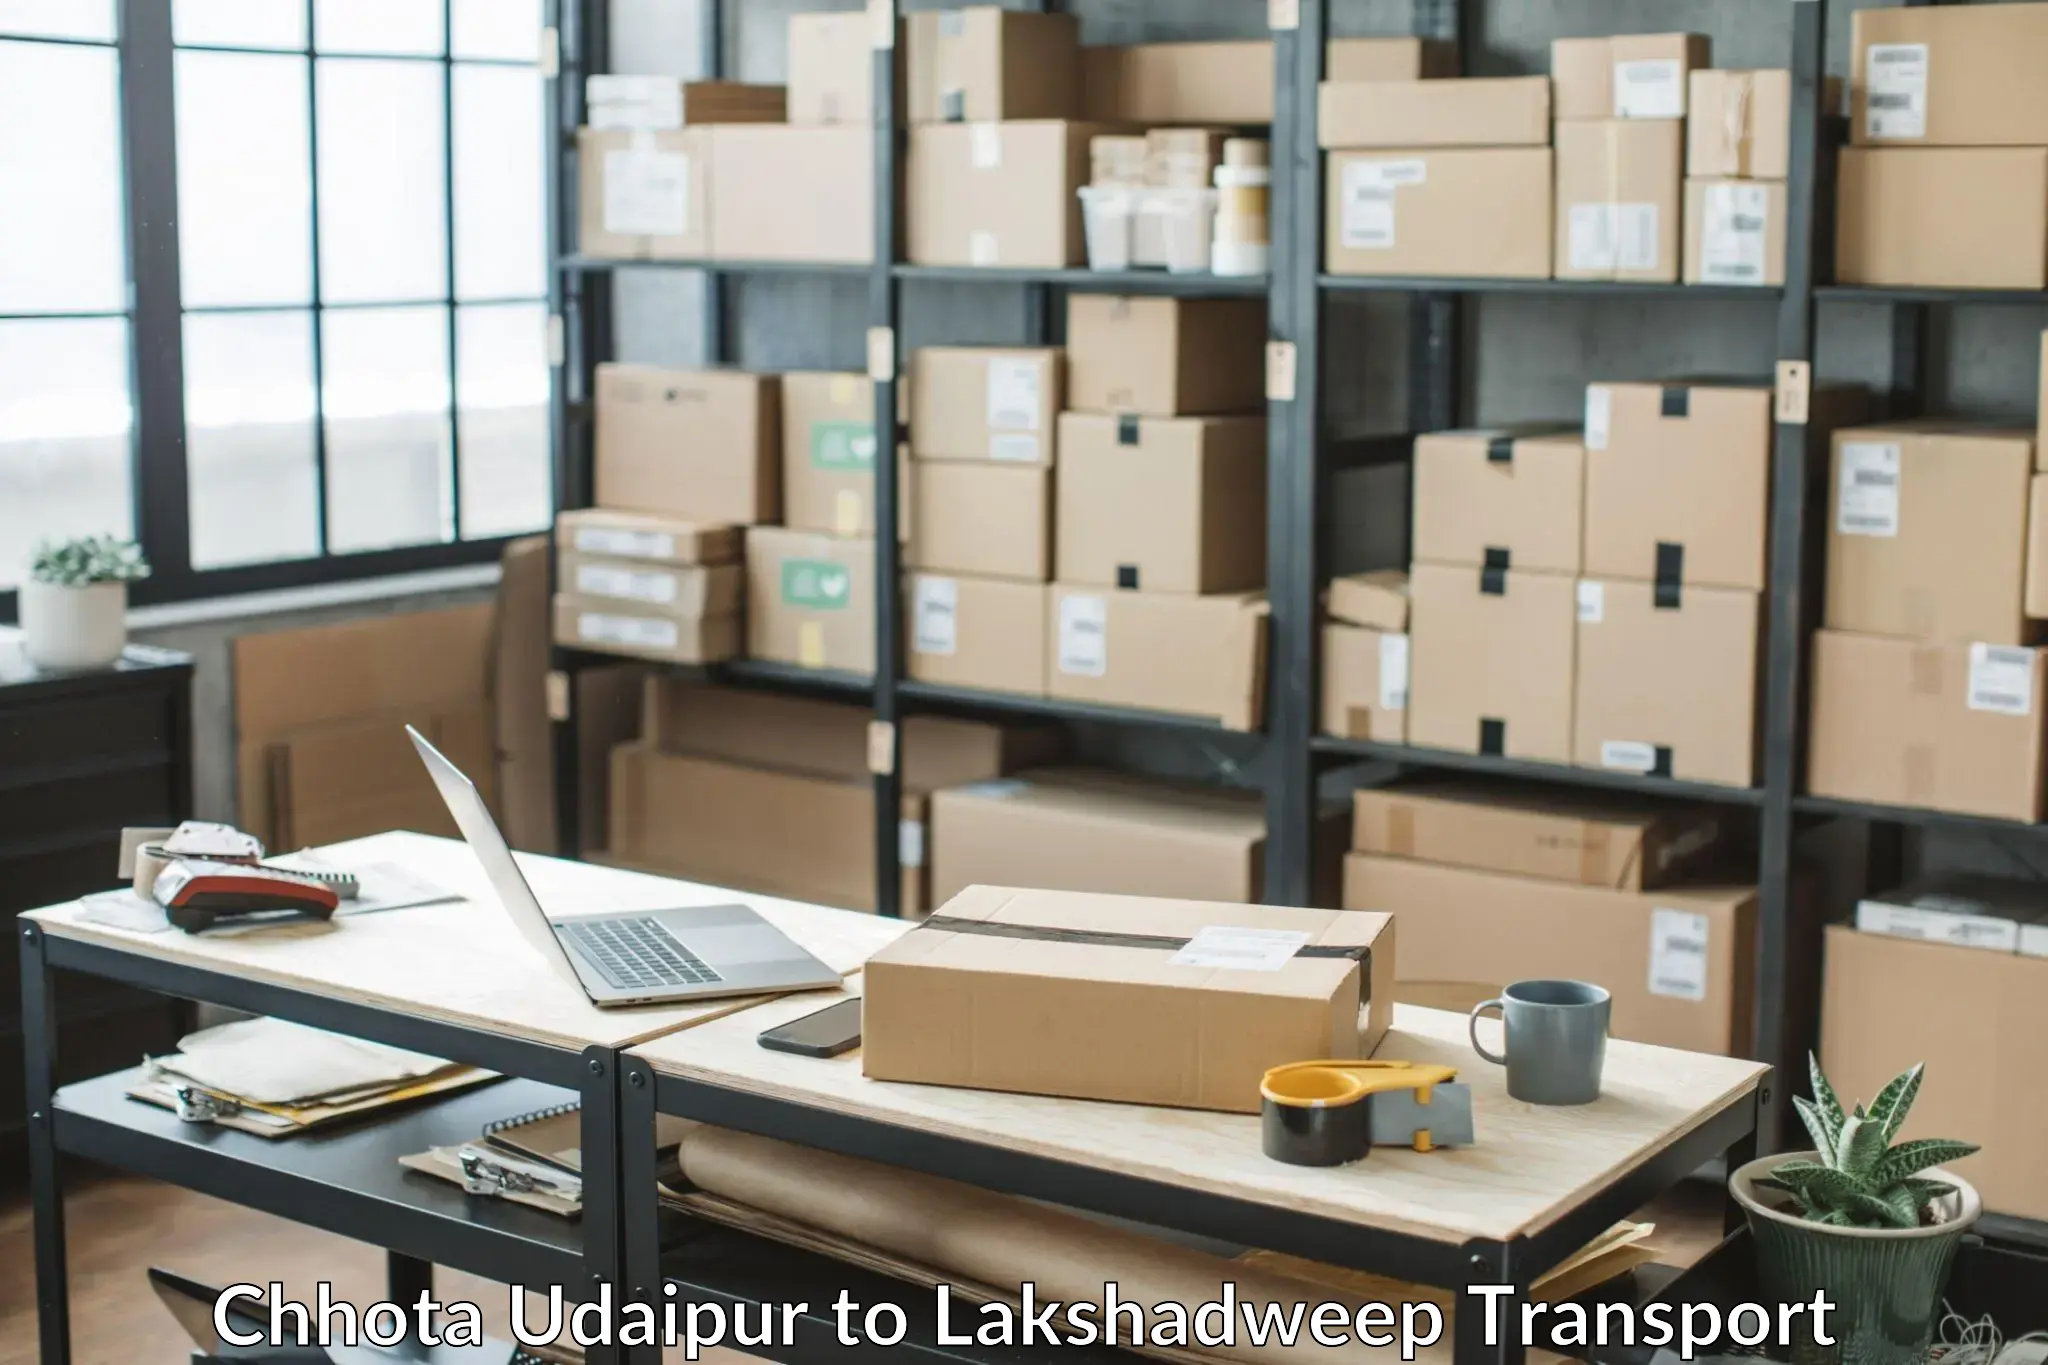 Daily parcel service transport Chhota Udaipur to Lakshadweep